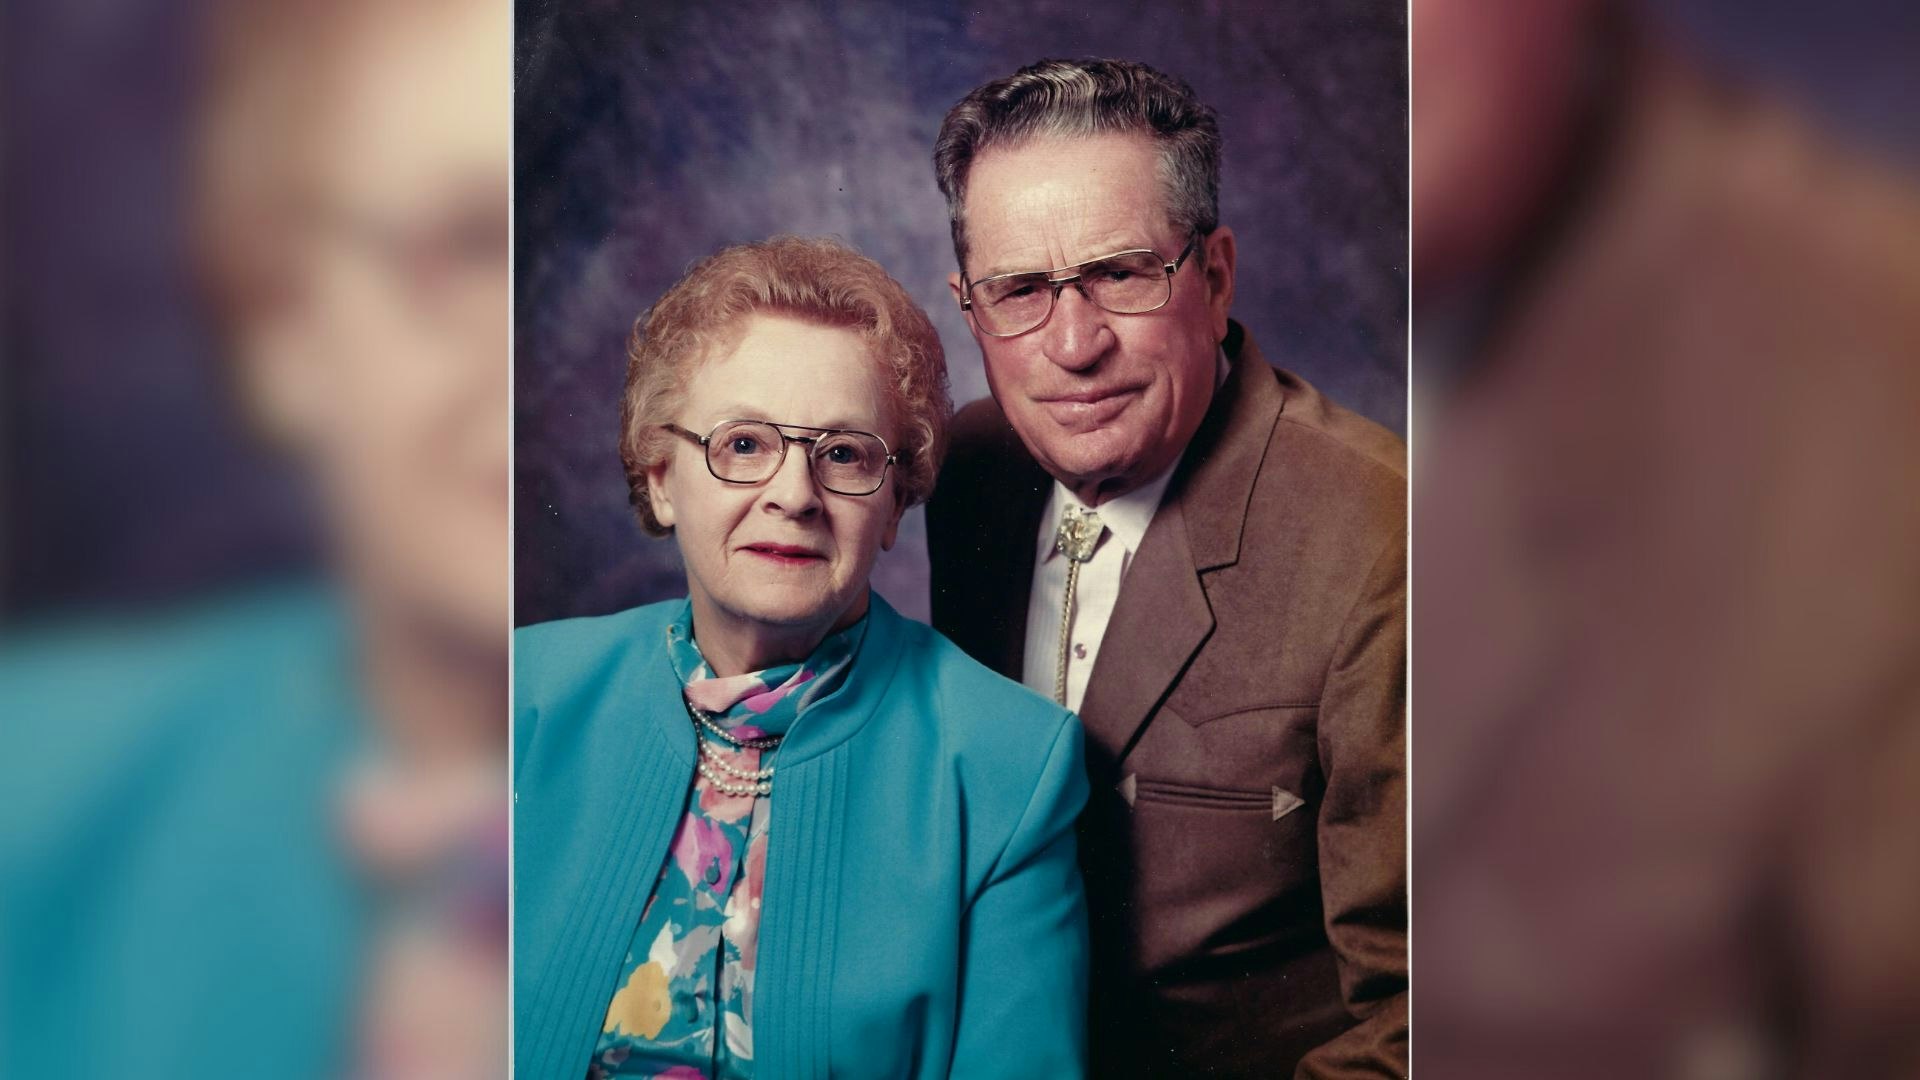 Vera and Don Brown were married in 1938 and enjoyed nearly 60 years of marriage.